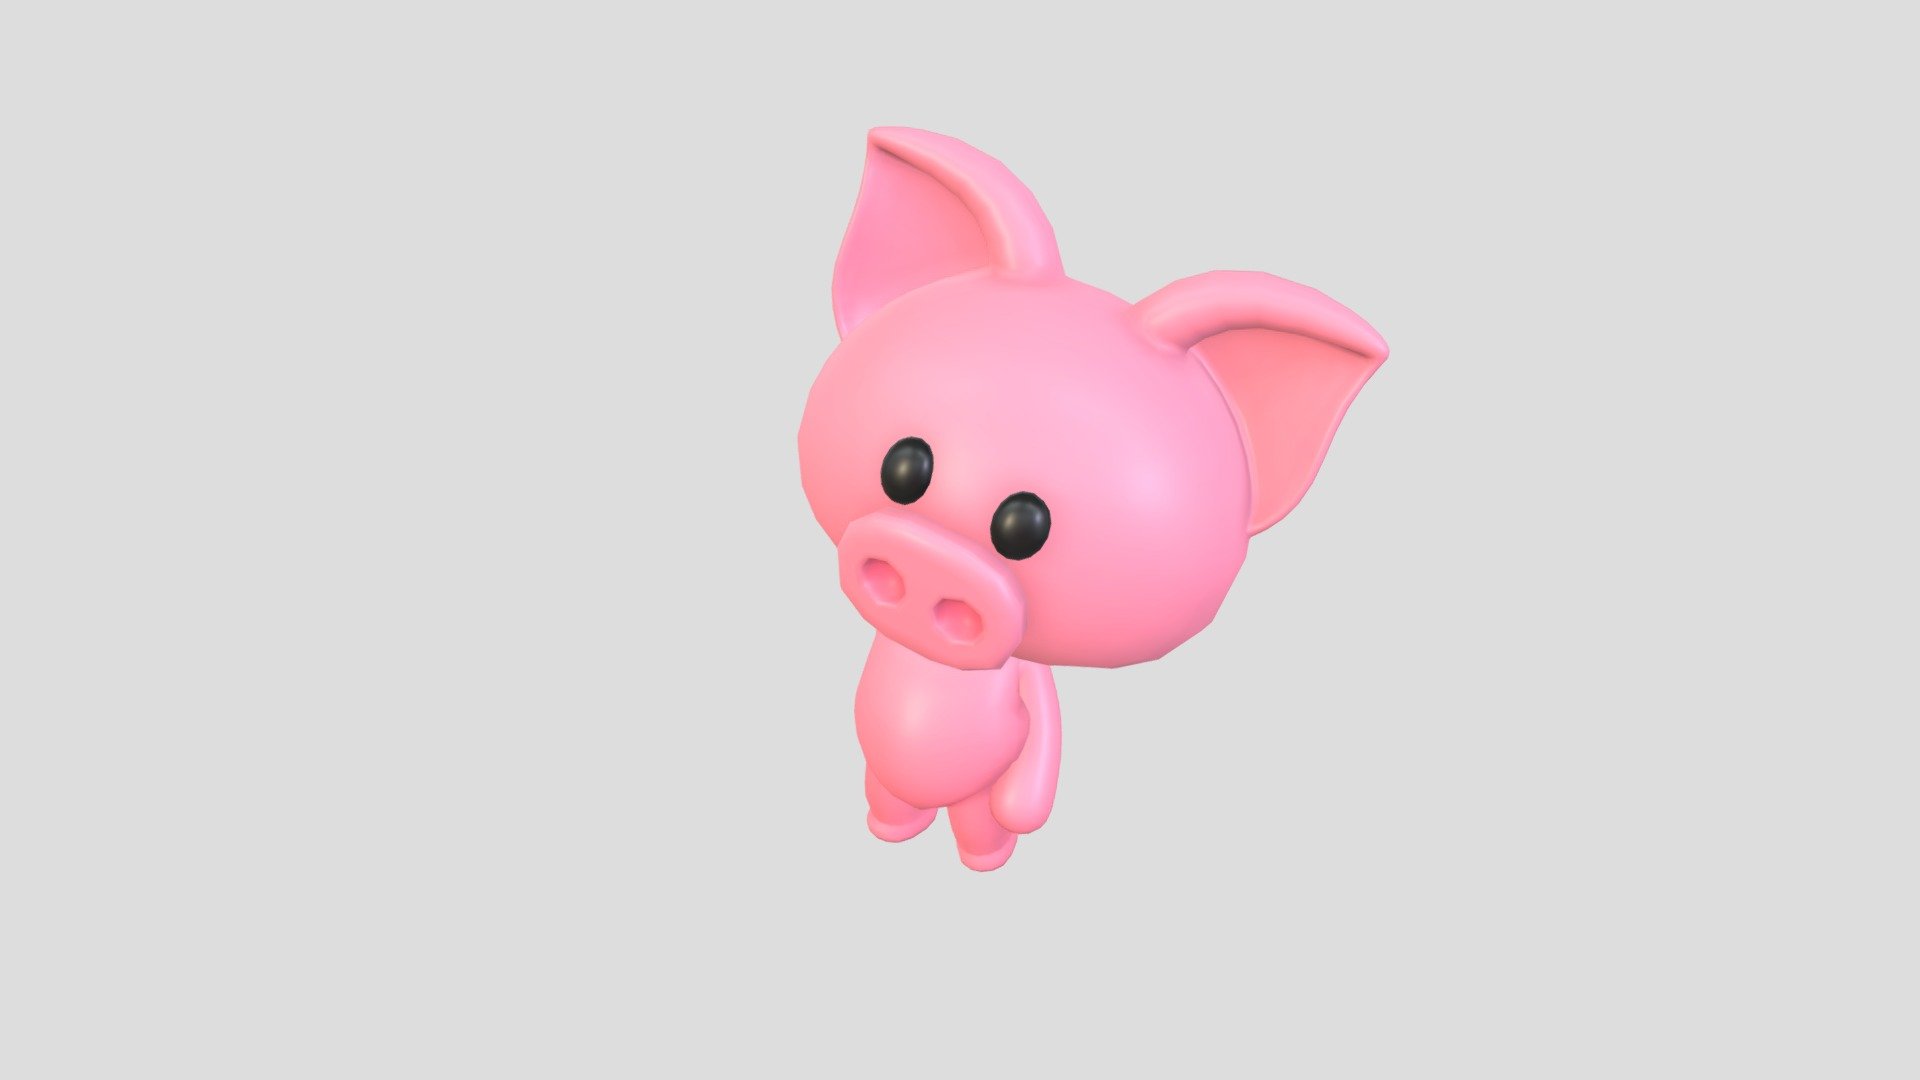 Rigged Pig character 3d model.      
    


File Format      
 
- 3ds max 2021  
 
- FBX  
 
- OBJ  
    


Clean topology    

Rigged with CAT in 3ds max          

FBX have bone and skin weight        

No Facial Rig               

Non-overlapping unwrapped UVs        
 


PNG texture               

2048x2048                


- Base Color                        

- Normal                            

- Roughness                         



2,692 polygons                          

2,647 vertexs                          
 - Character054 Rigged Pig - Buy Royalty Free 3D model by BaluCG 3d model